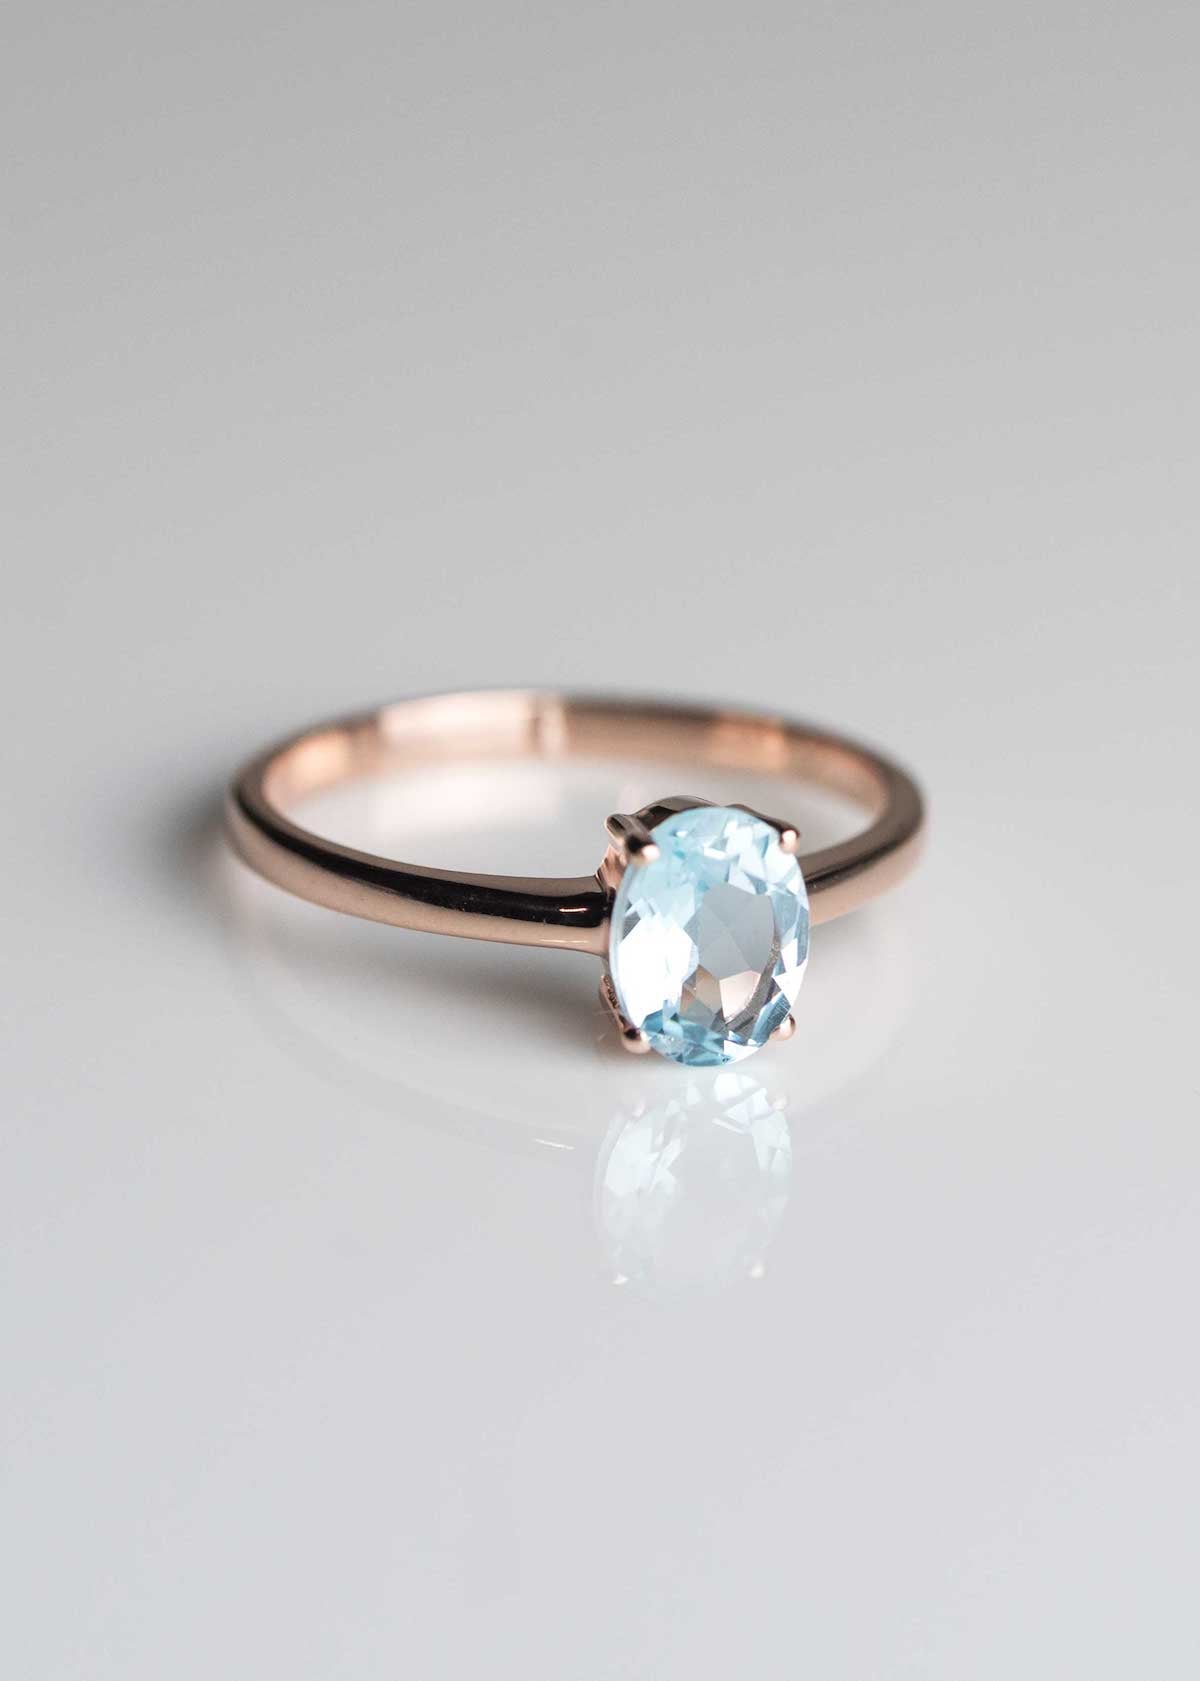 Blue Topaz Ring - Signature Oval